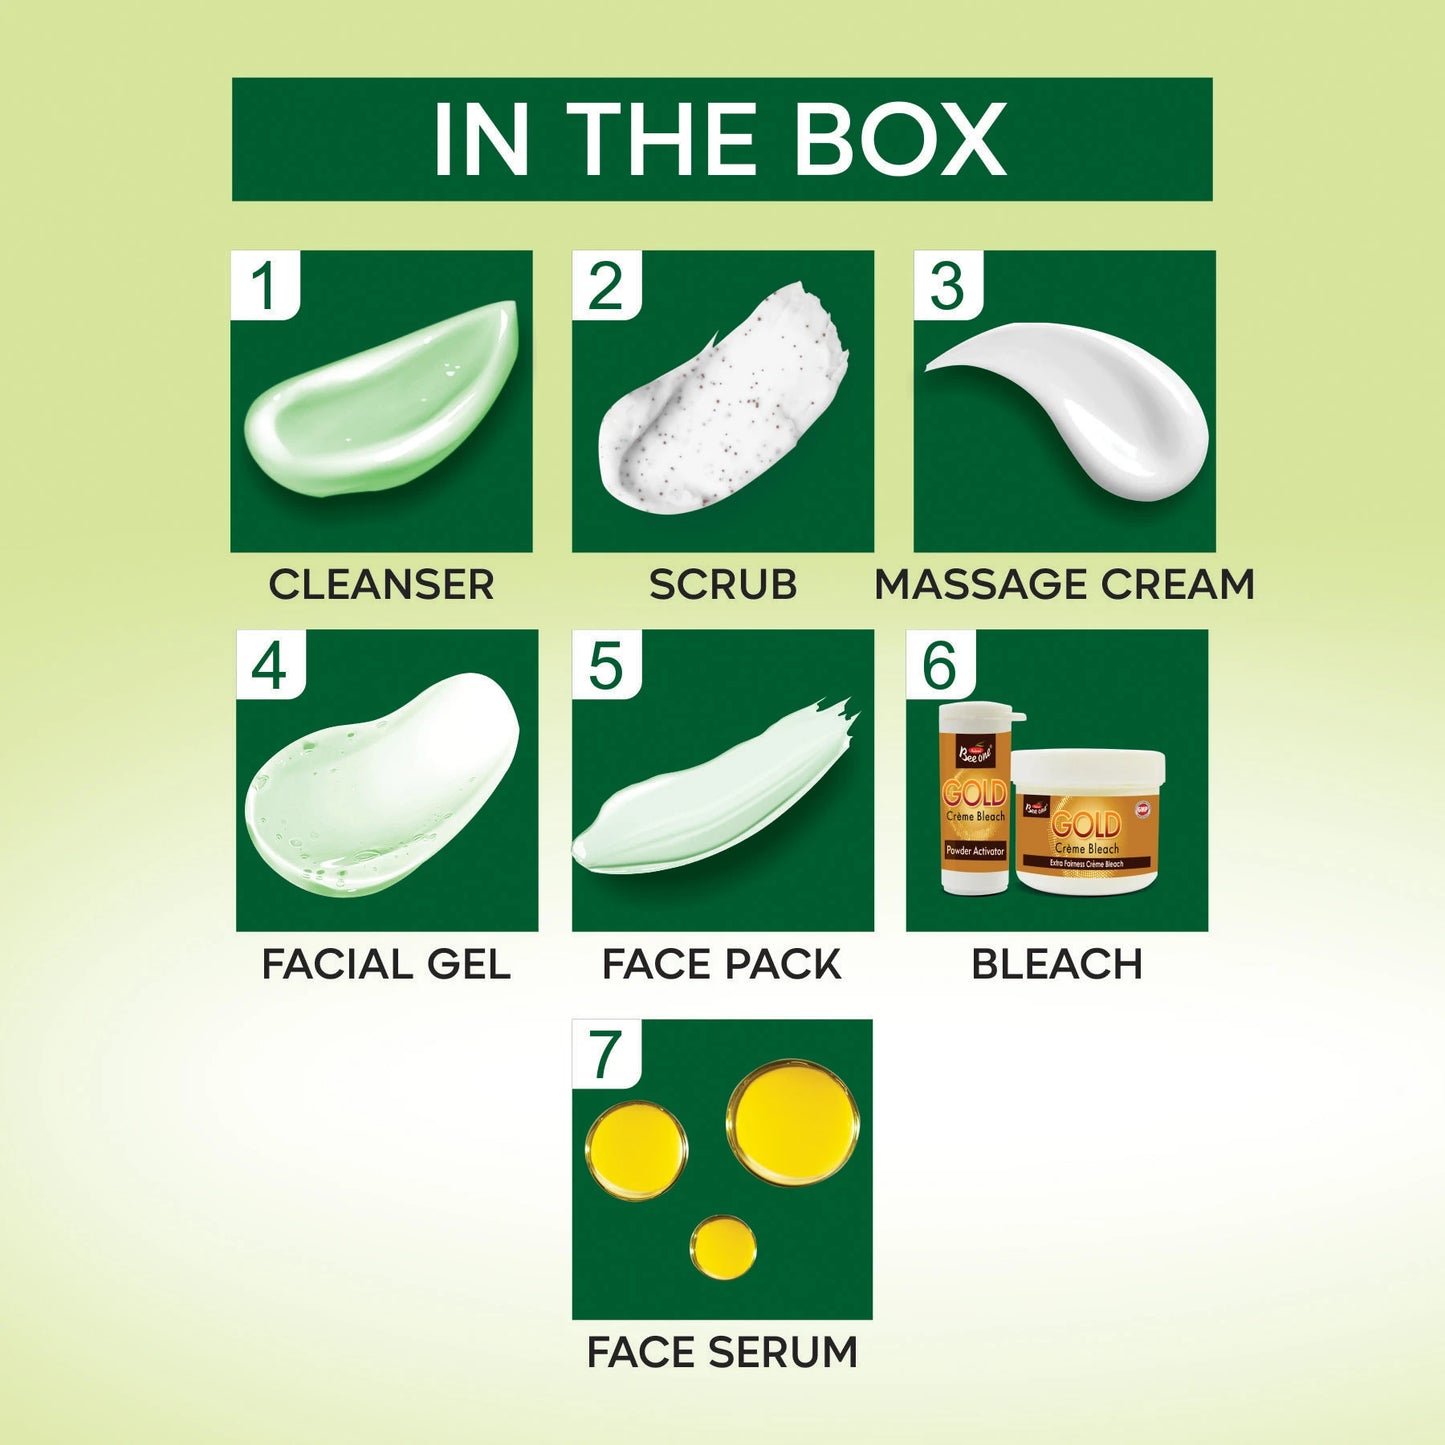 MINT FACIAL KIT (PACK OF 2)